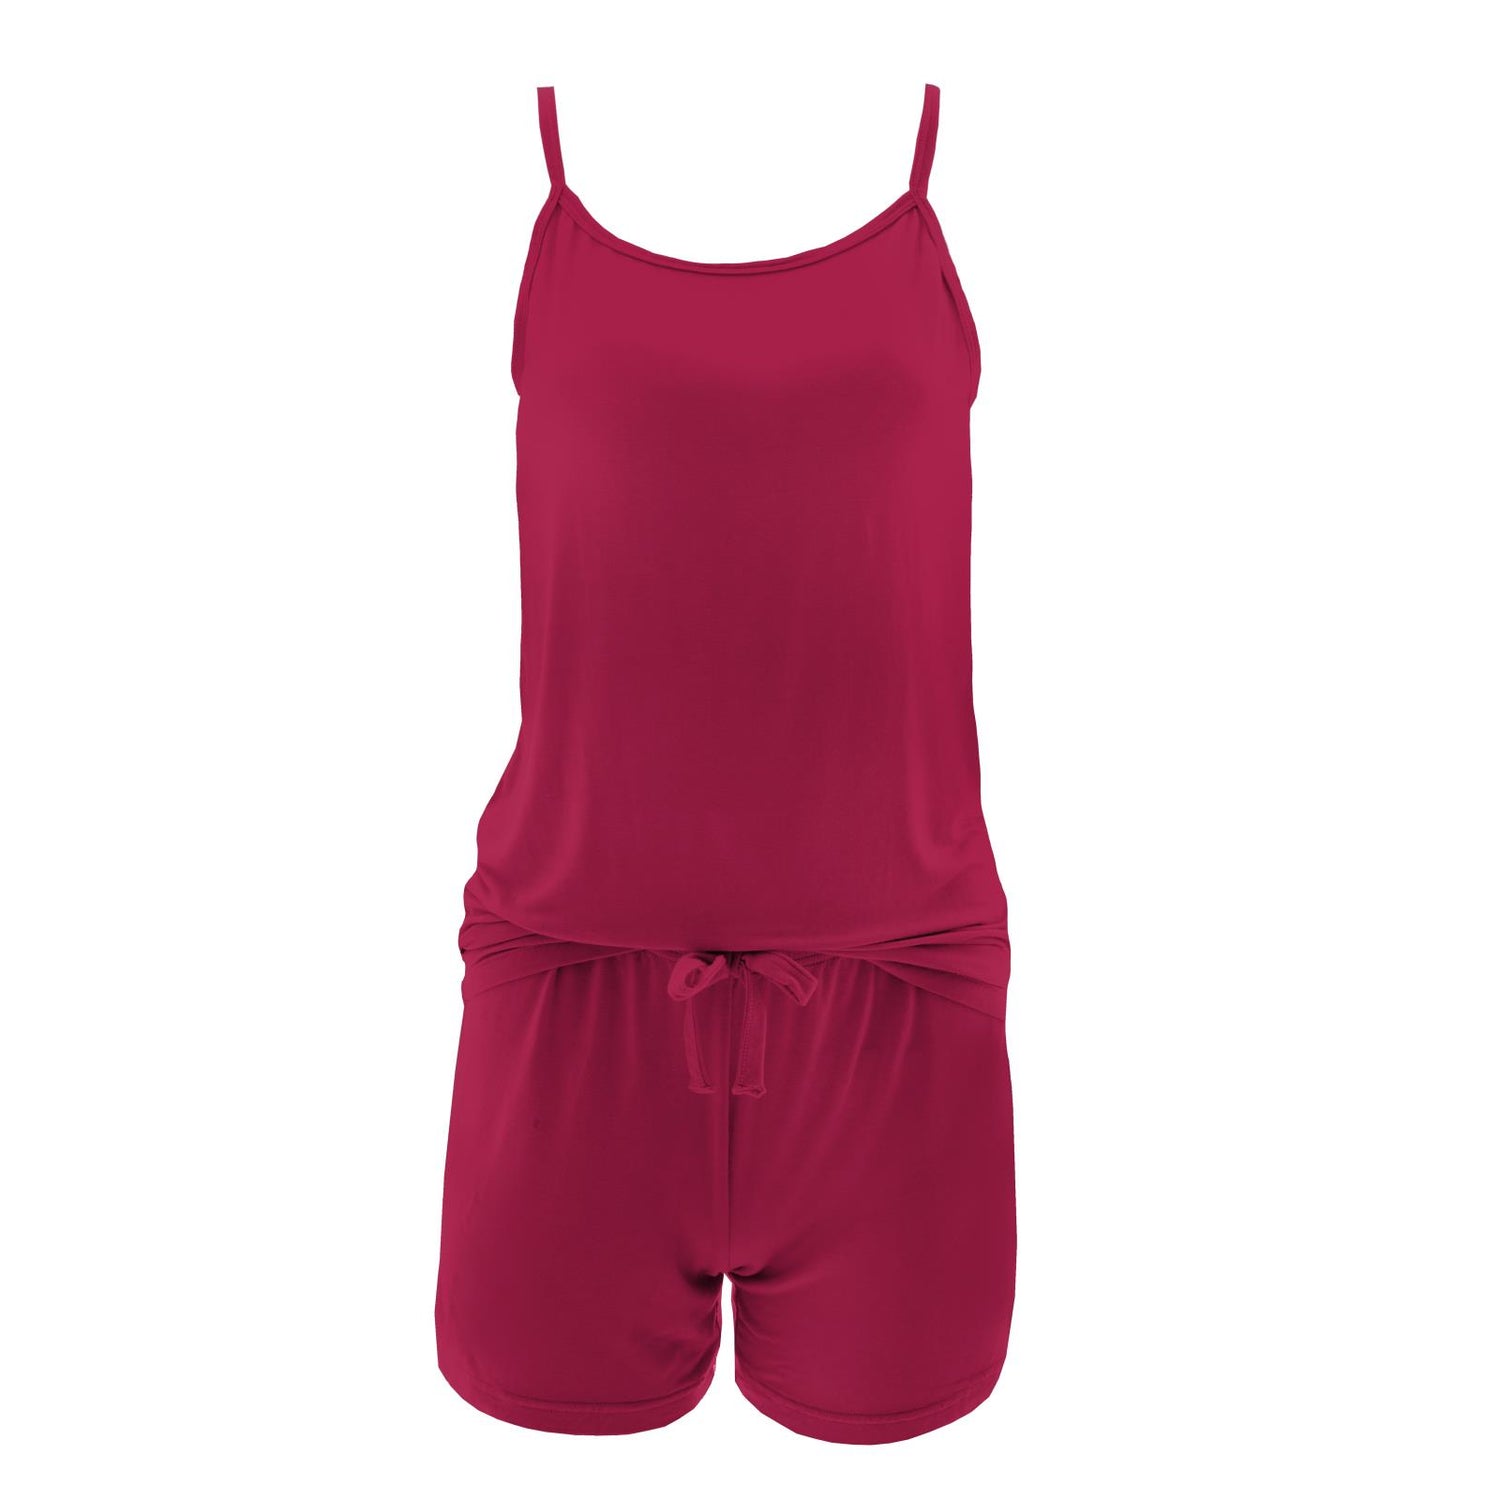 Women's Cami and Lounge Shorts Set in Rhododendron